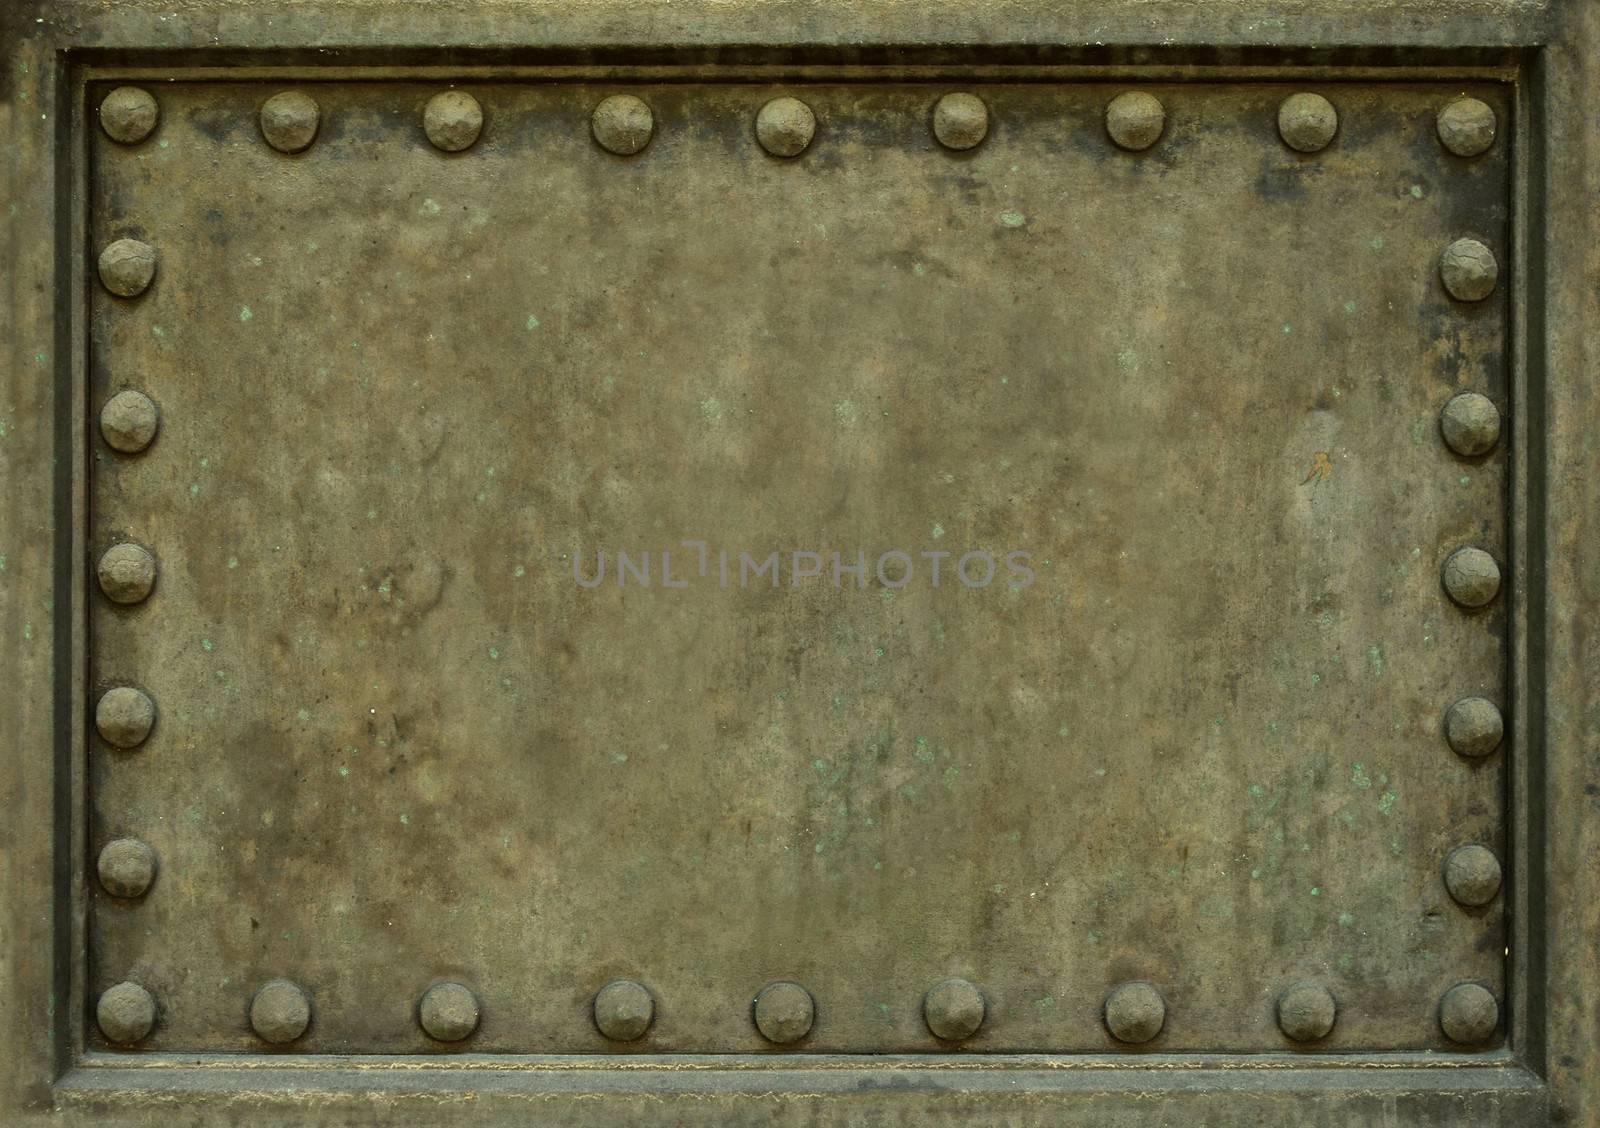 Background Texture Of Heavy Protective Metal Plate With Rivets